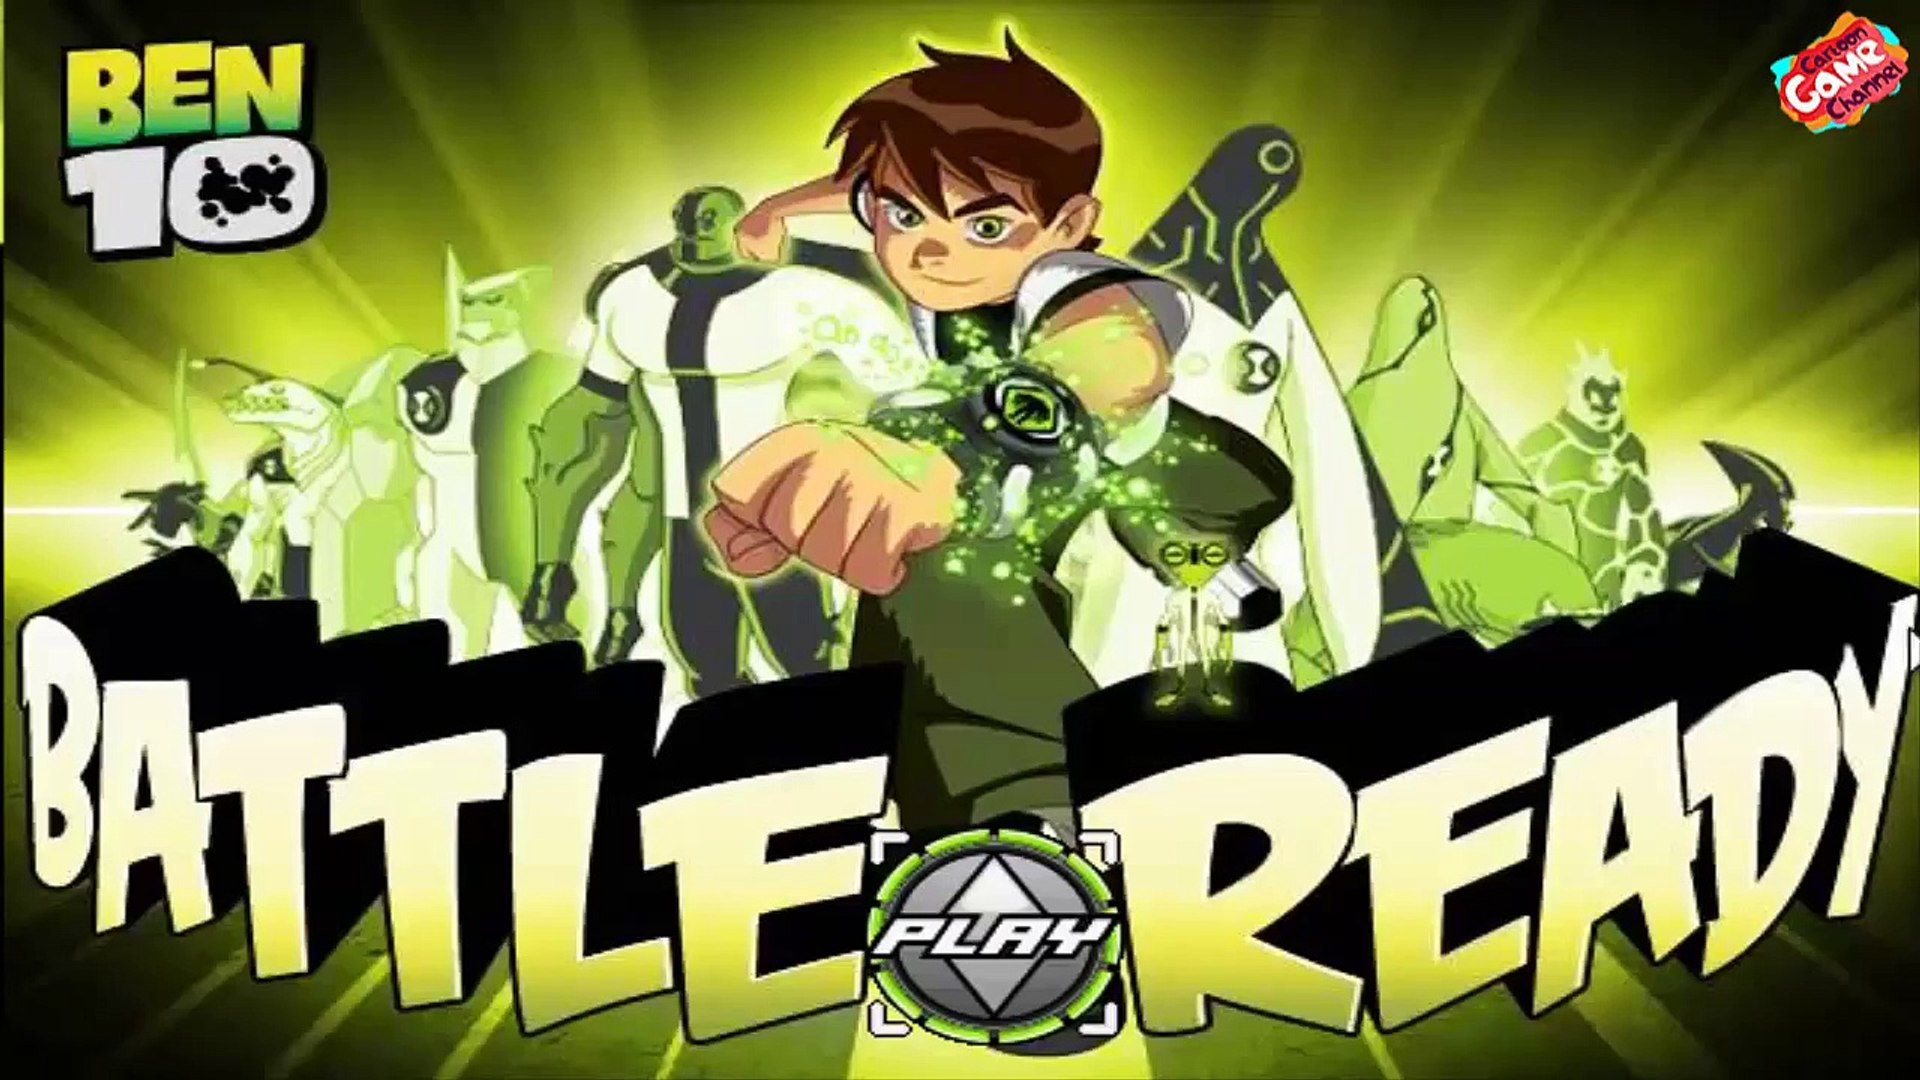 Ben 10 Games: Battle Ready Full Game Play - Game for Kids 2014 – Видео  Dailymotion